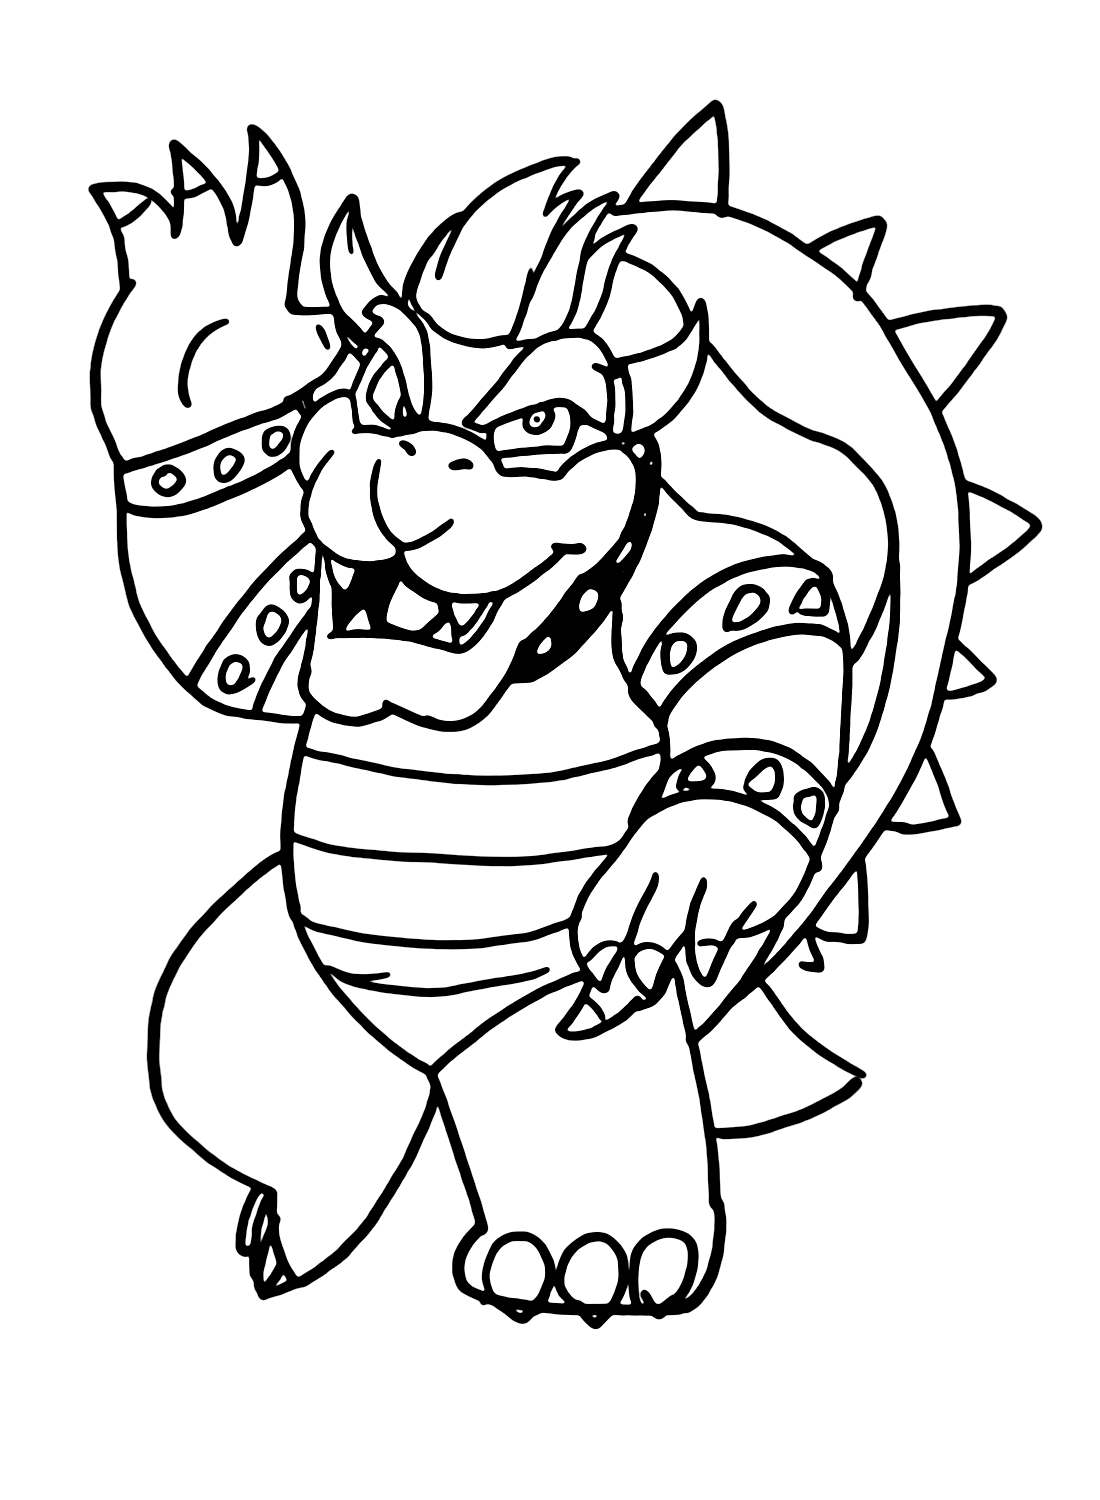 Bowser Mario Printable from Bowser